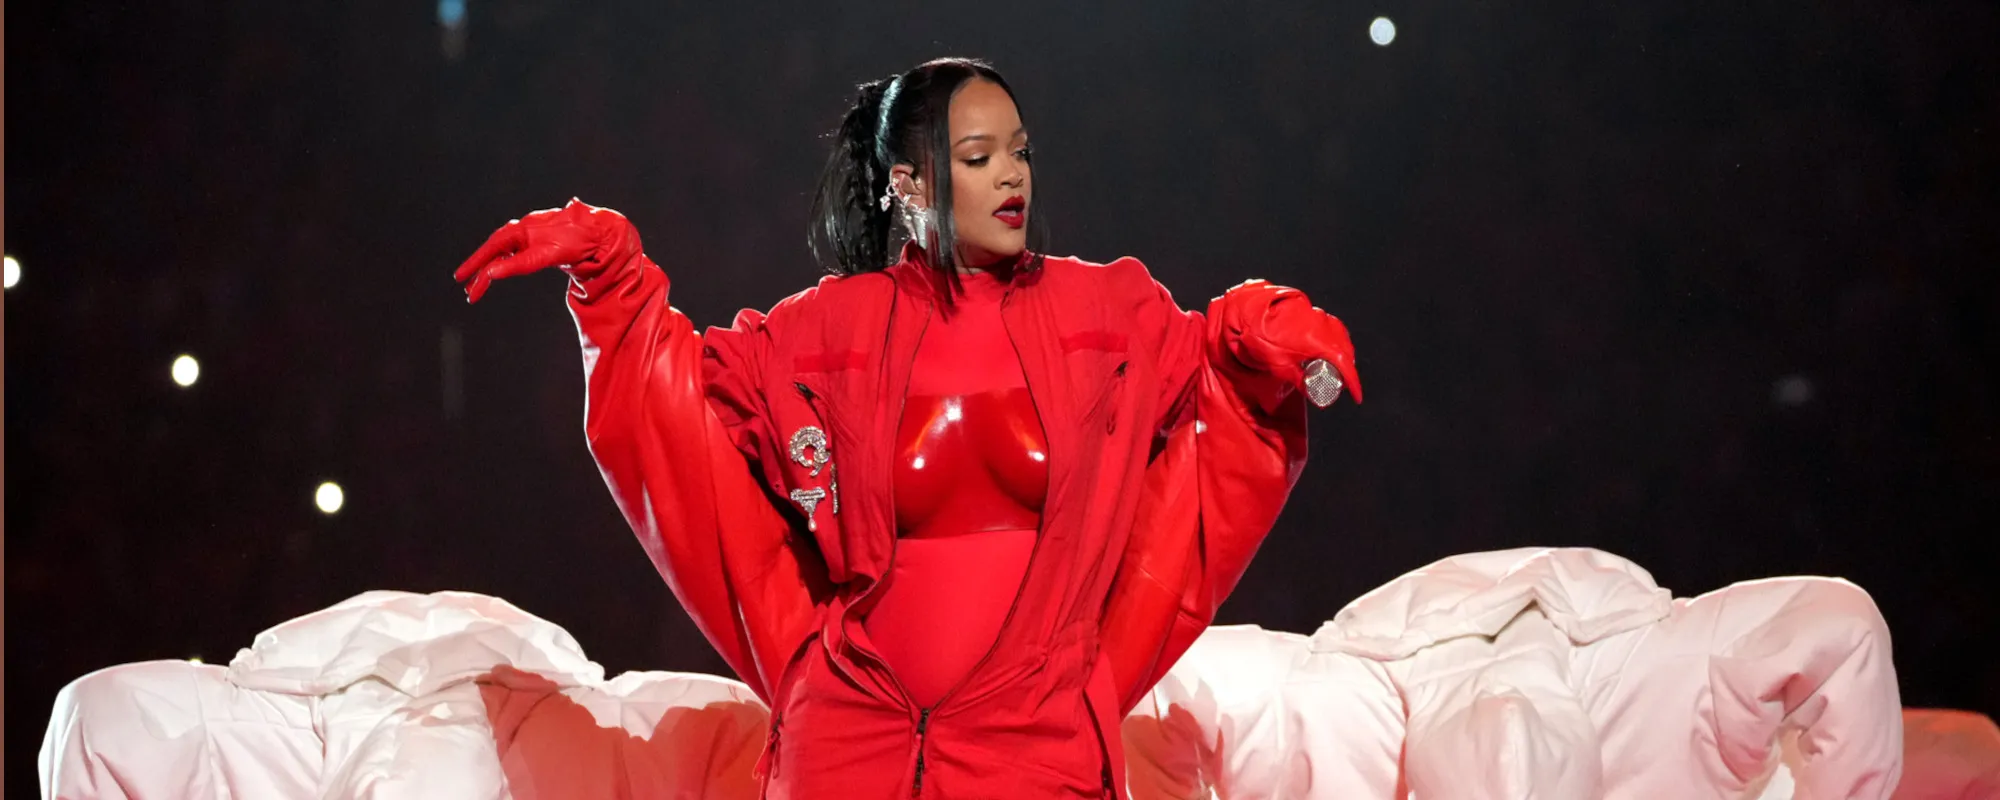 Rihanna on Her Next Album: “I Want It to Be This Year”